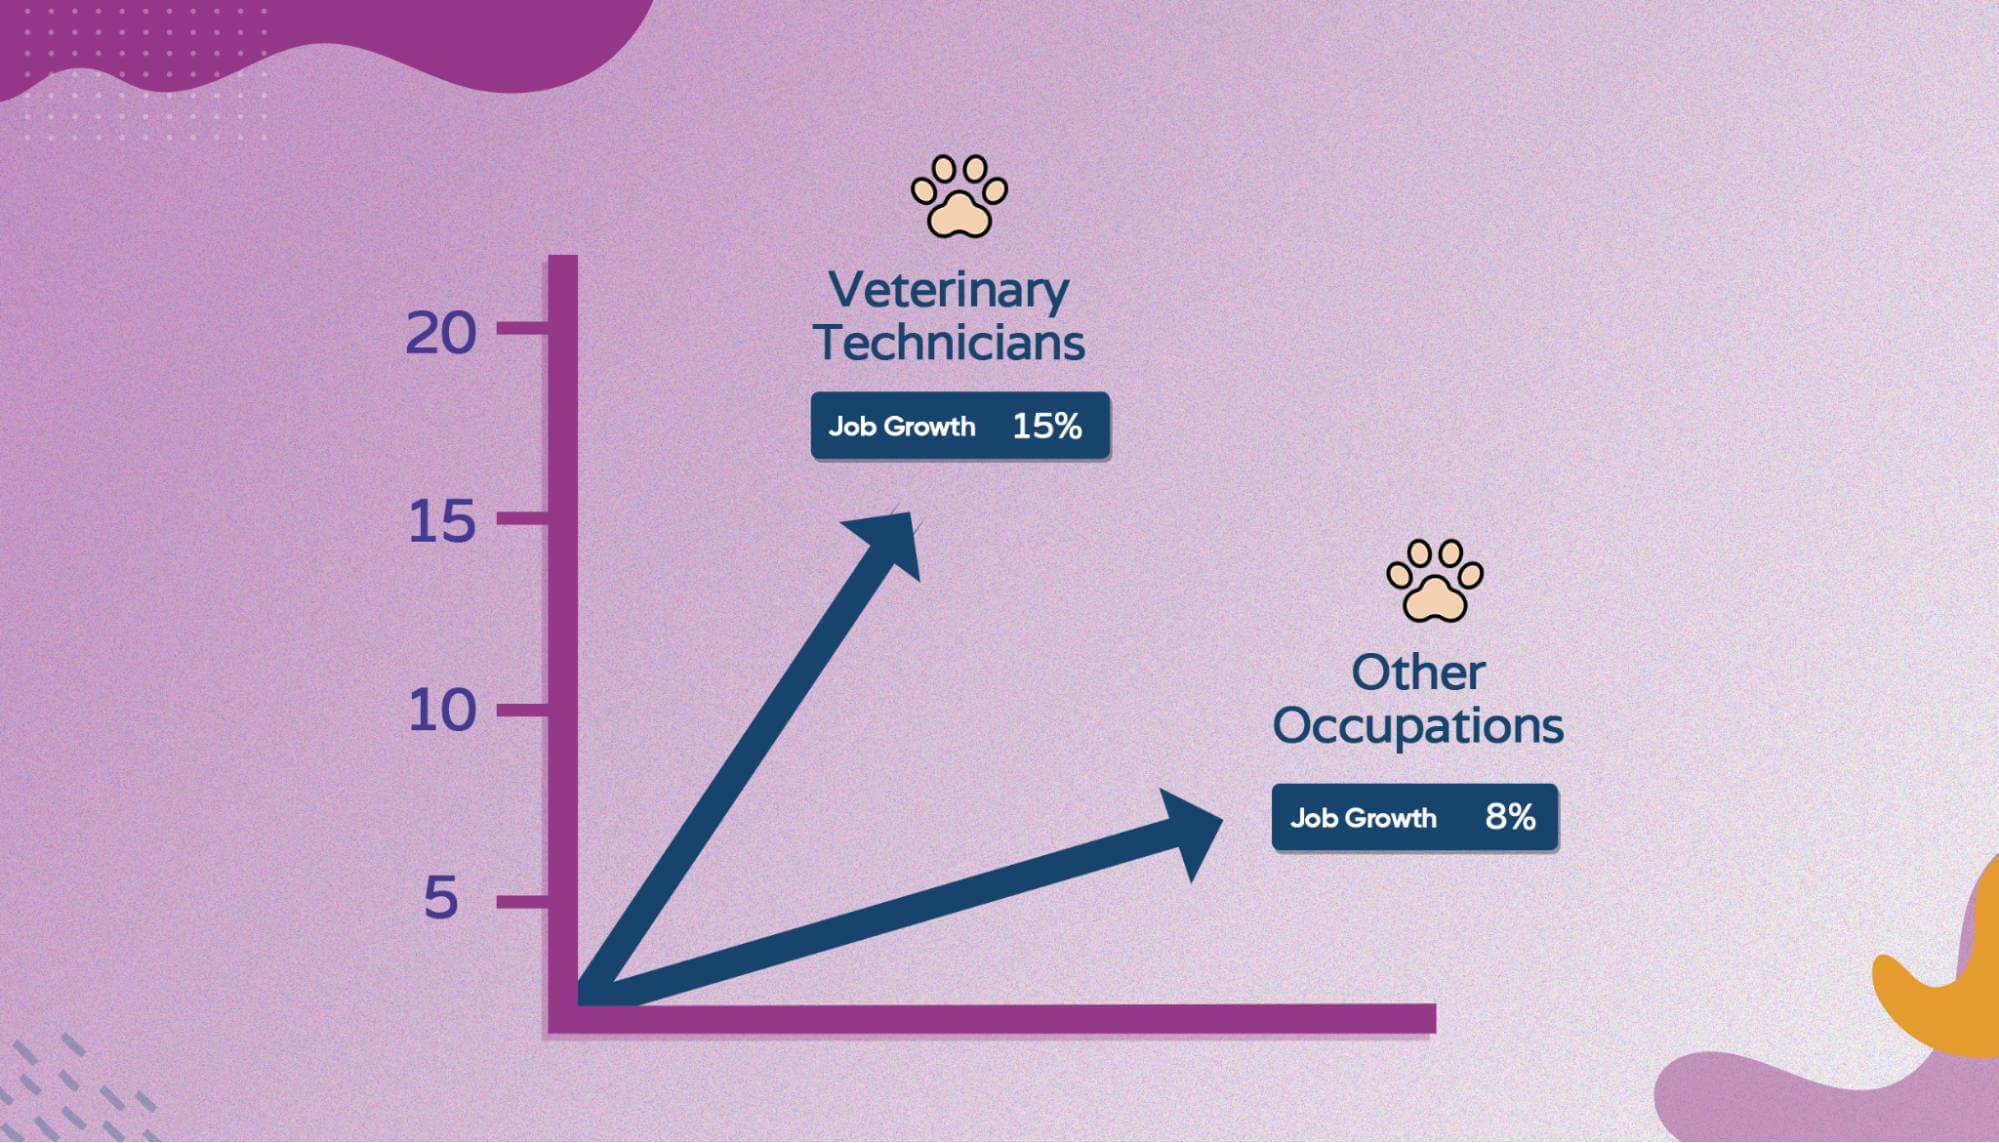 Graph showing job growth for vet techs compared to all other occupations